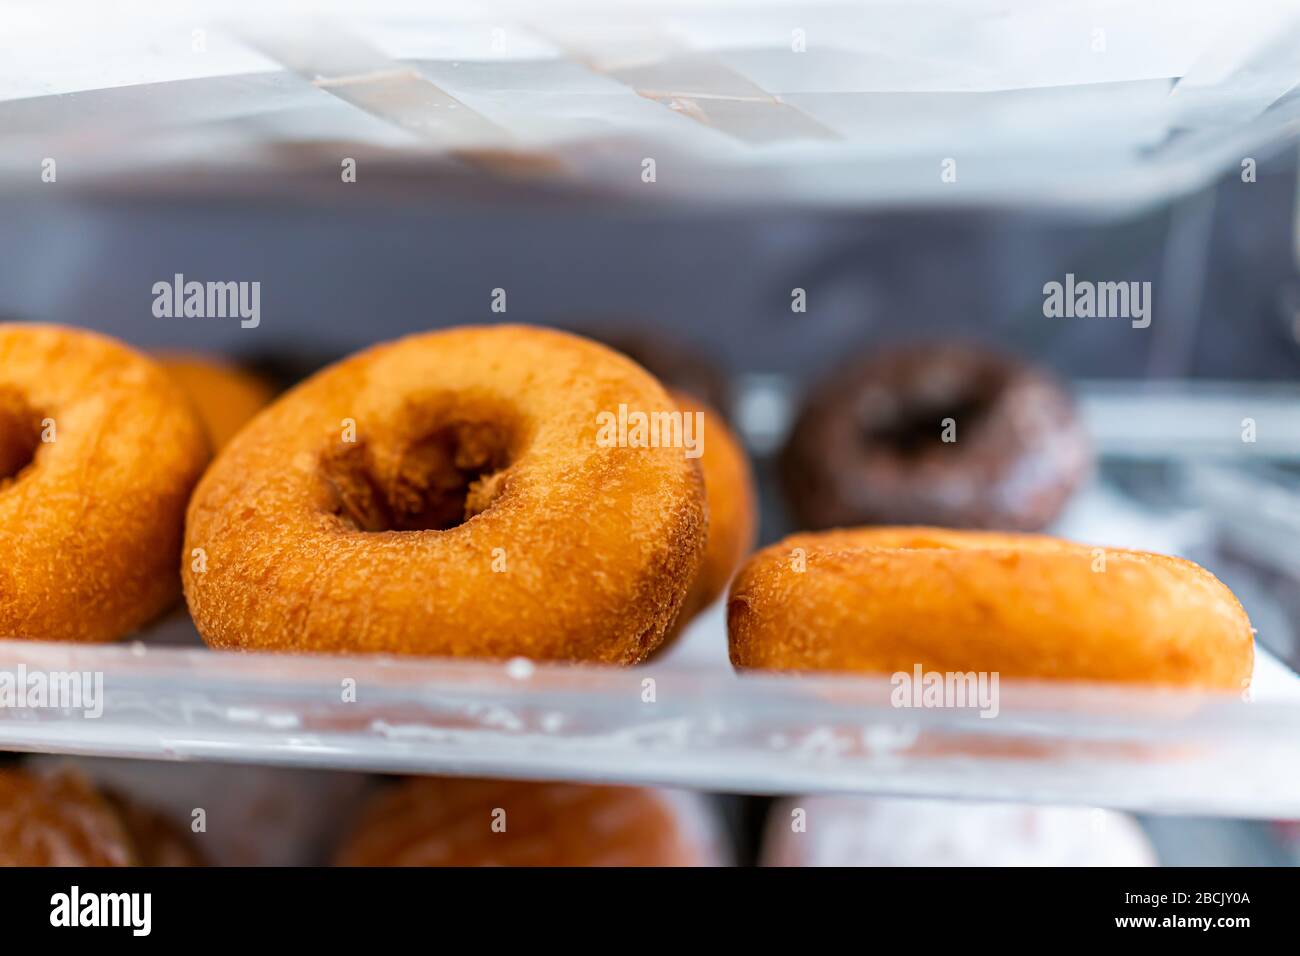 Brown plain donuts closeup on bakery tray deep fried with holes on plastic display counter with nobody Stock Photo